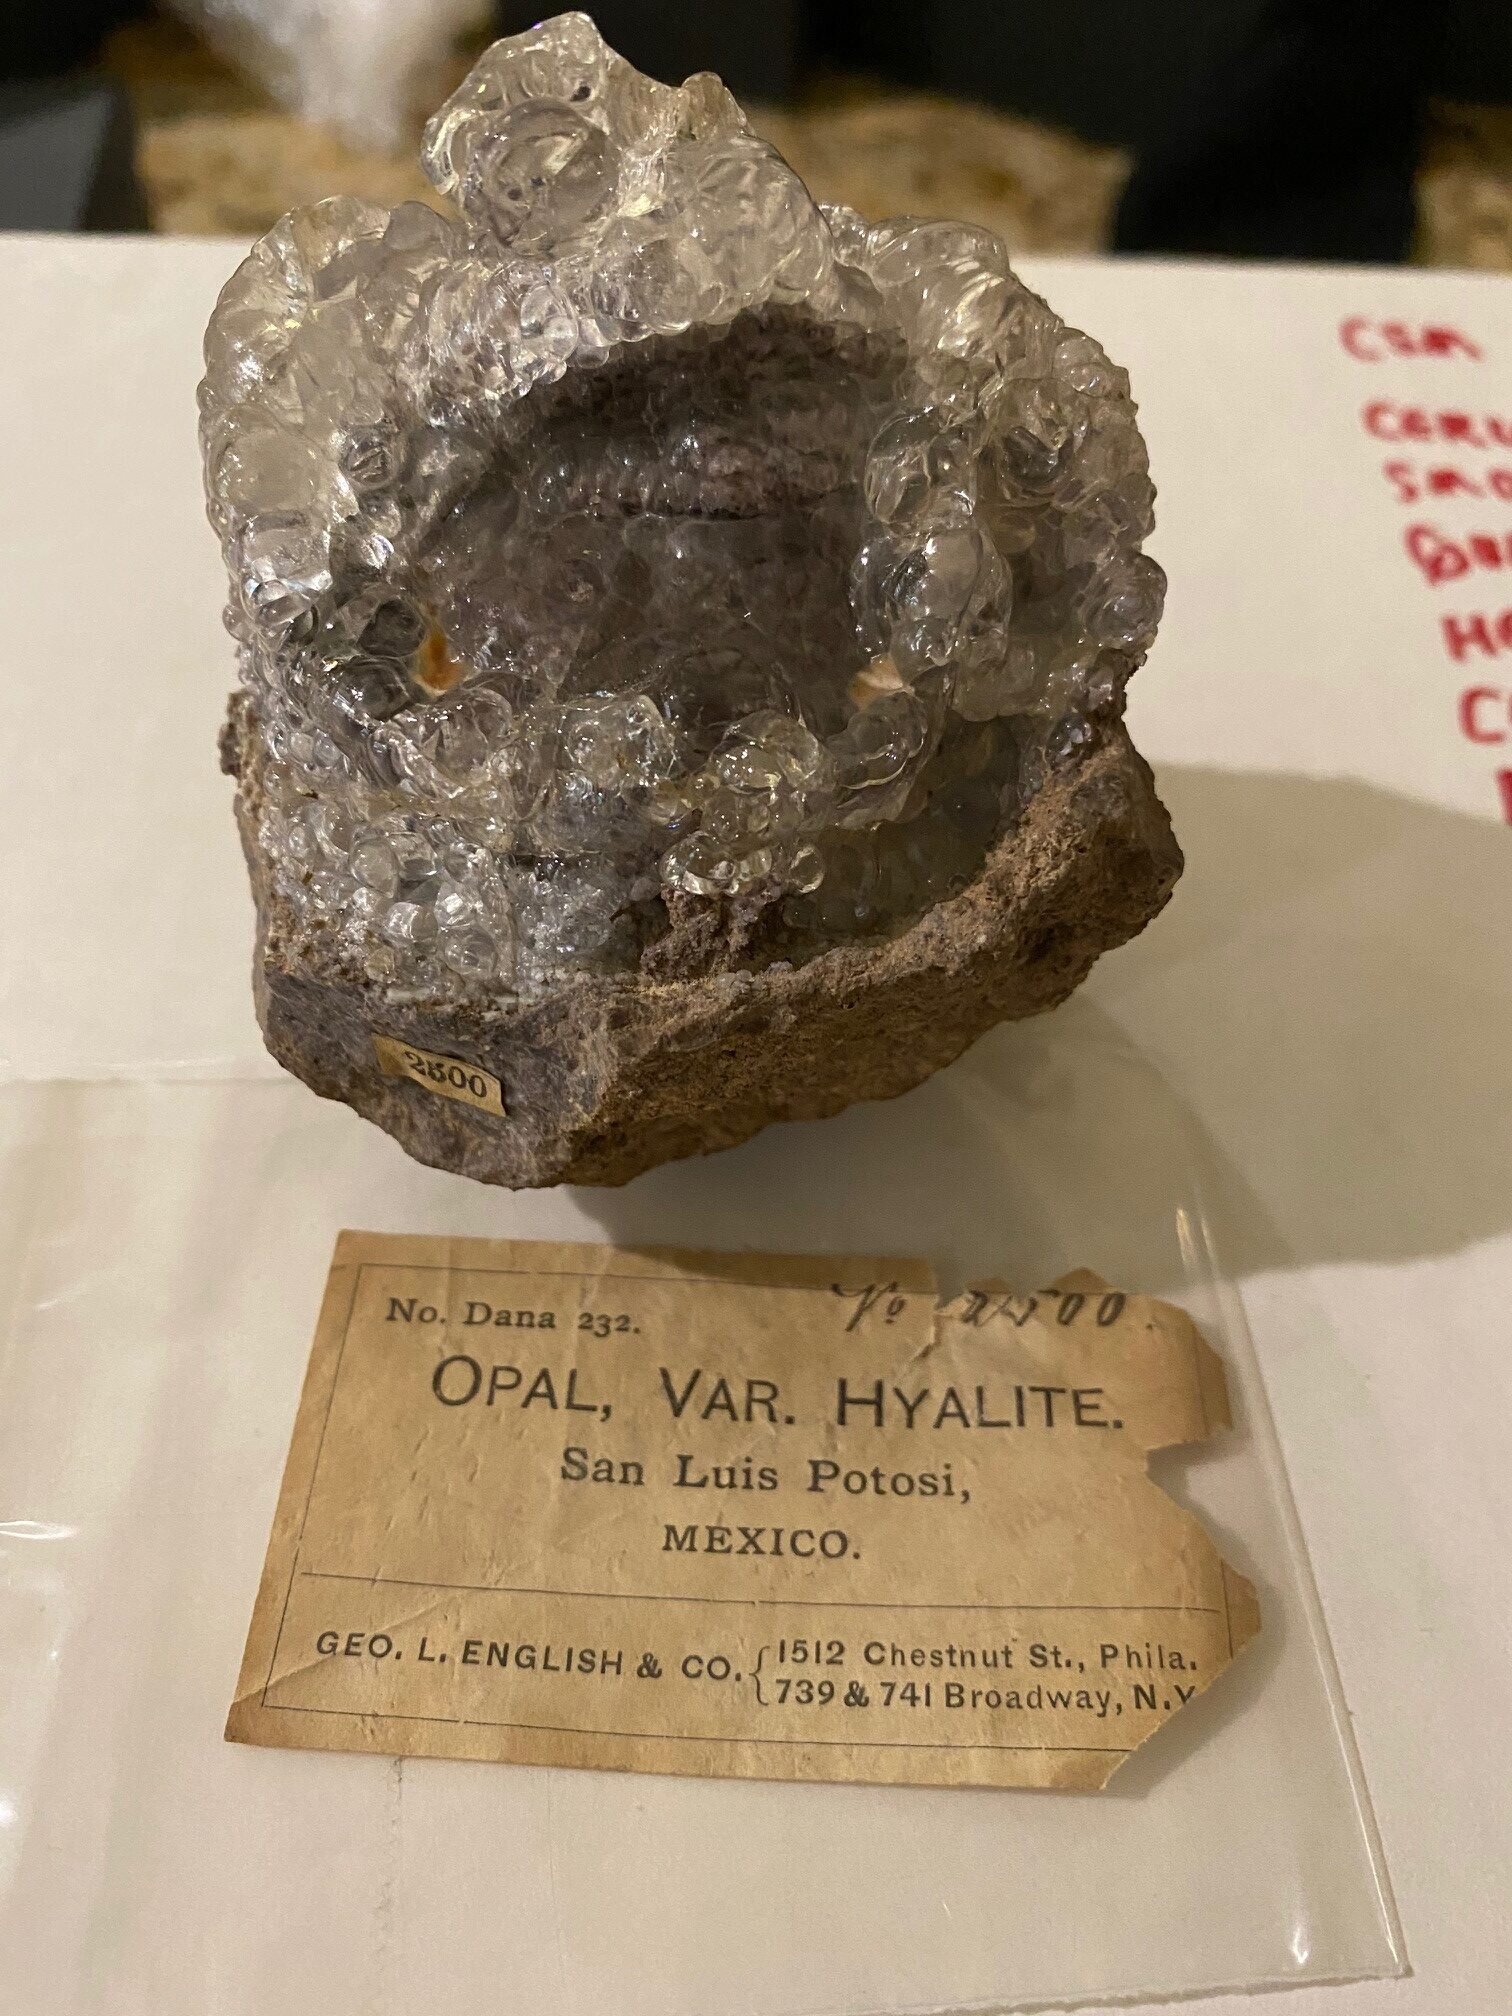 Old George English Label with this Hyalite Opal – Mexico